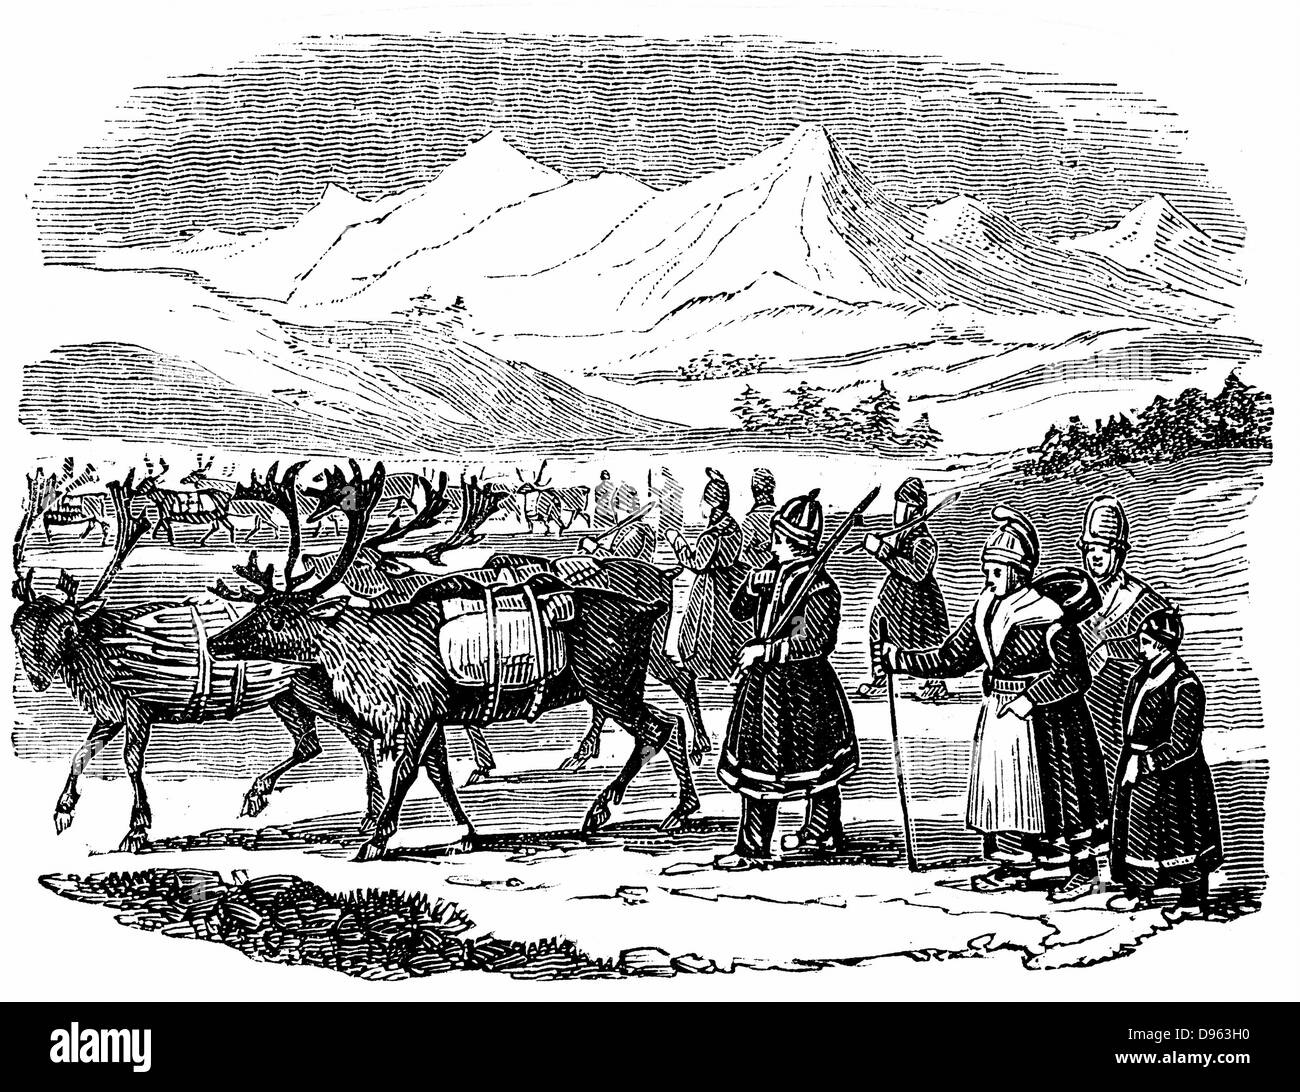 Lapps setting out on a migration with reindeer carrying packs. Nomadic herdsmen of Arcitic regions whose reindeer provided food, clothing, tools and transport.  Wood engraving 1840. Stock Photo